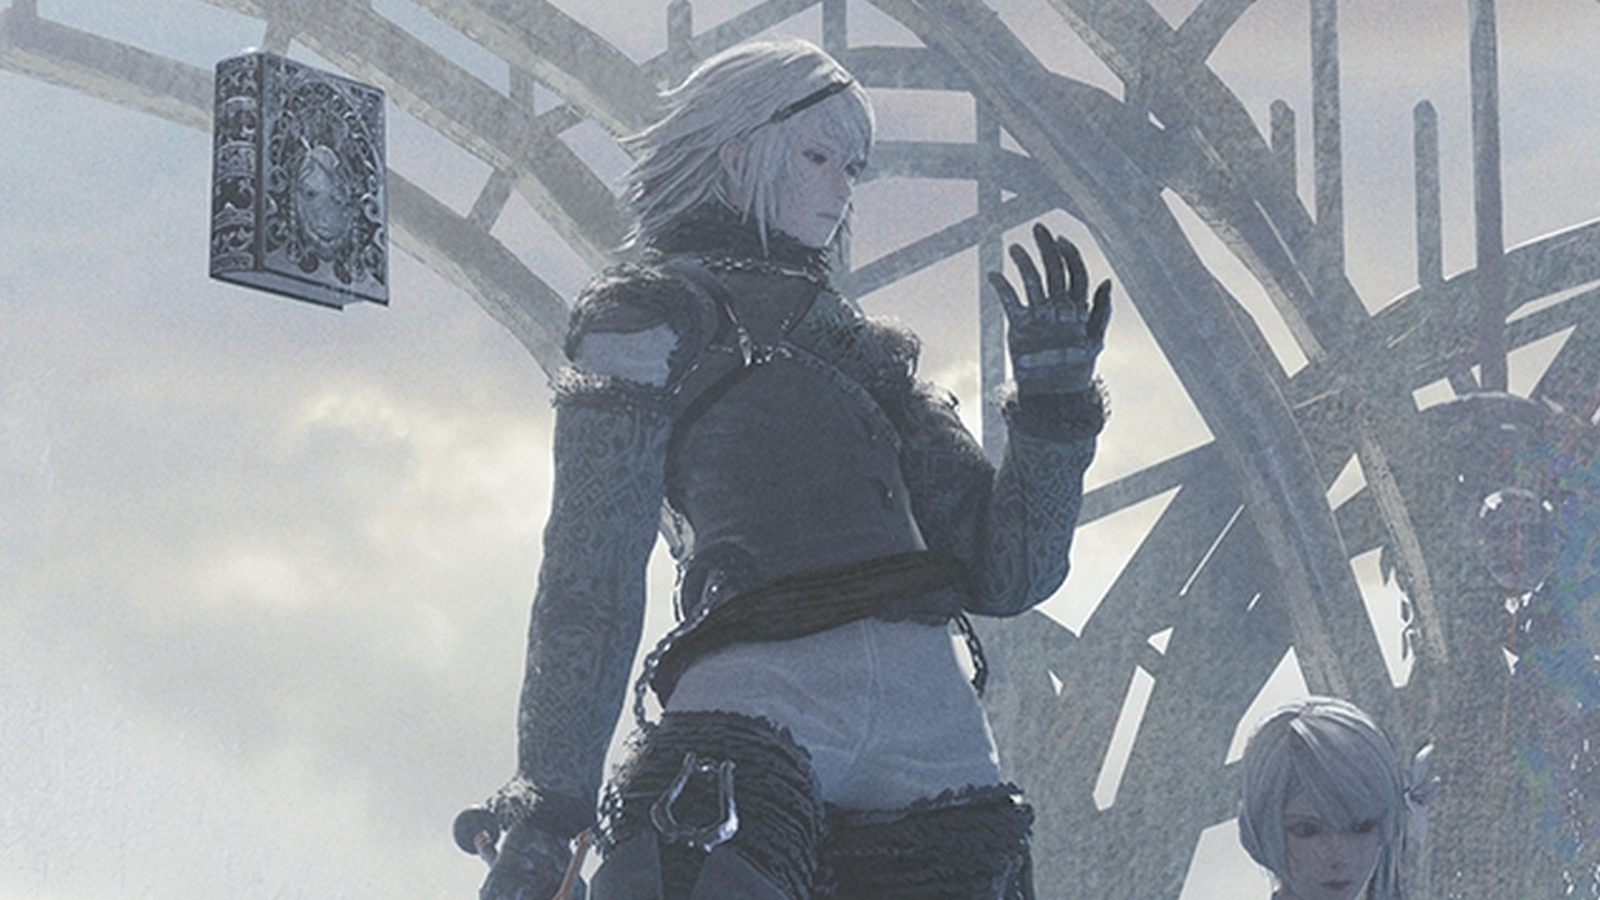 NieR Replicant ver. 1.22474487139 review - a better version of the  weakest game in the series